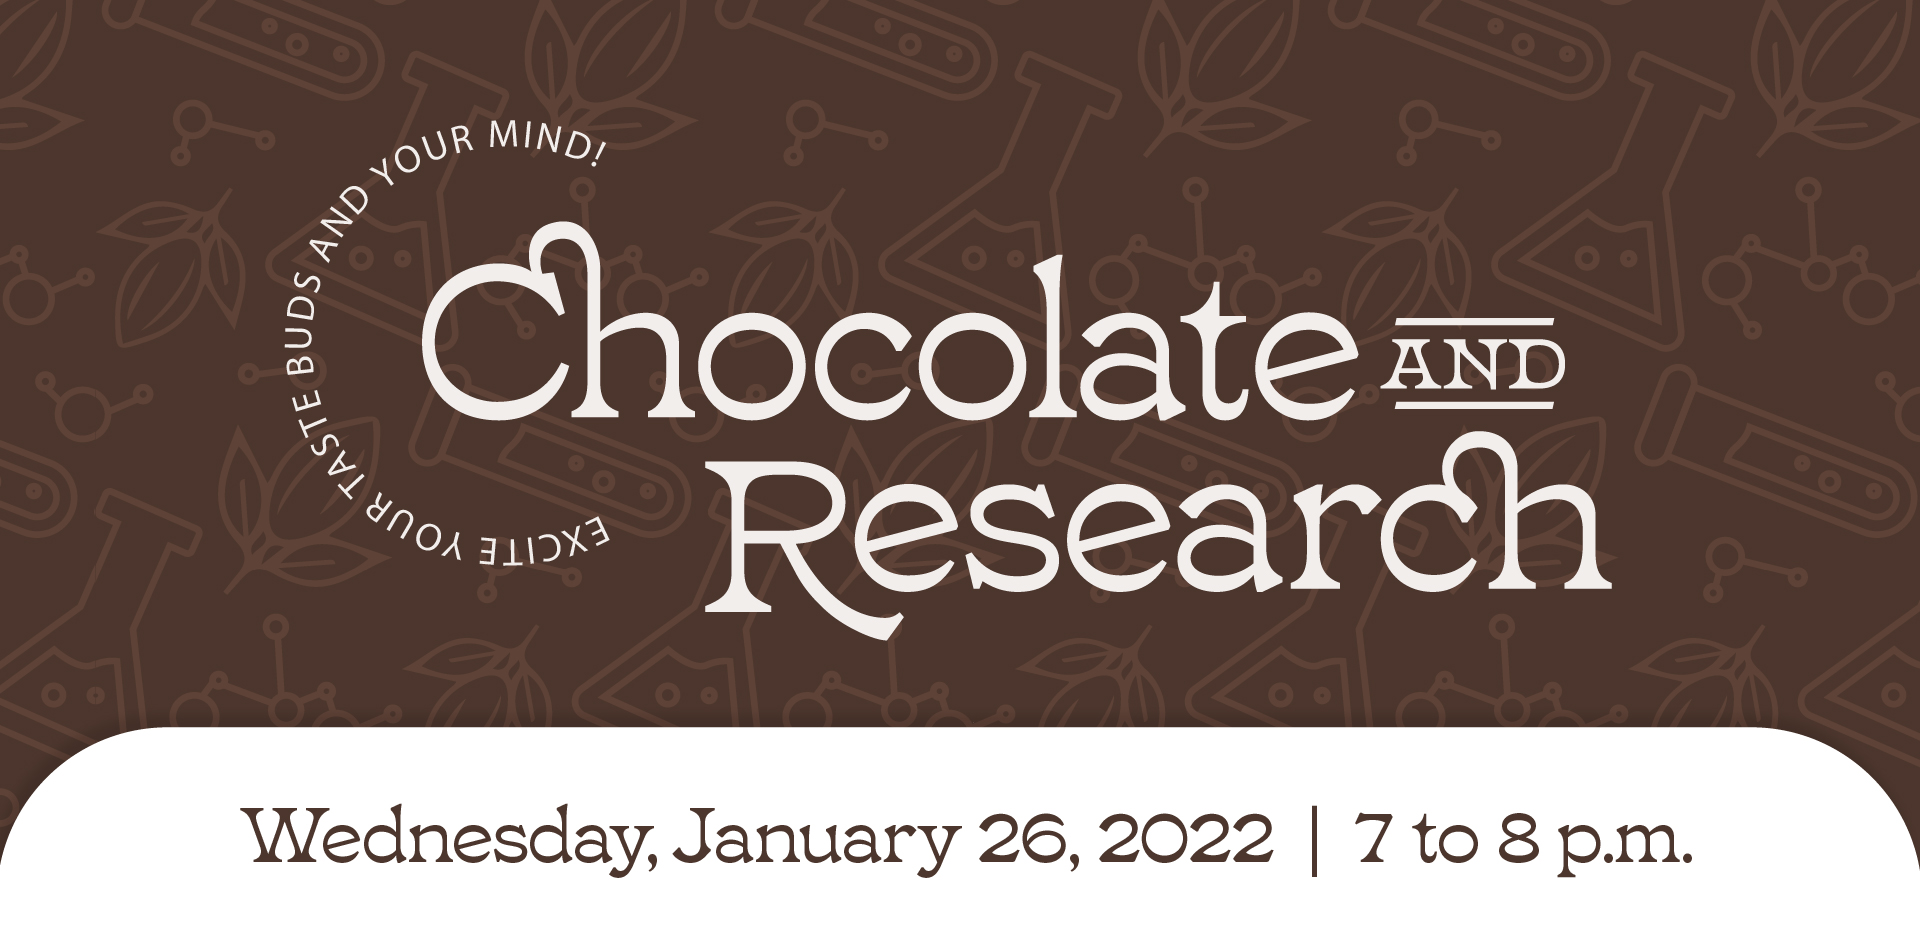 Chocolate and Research - January 26, 2022